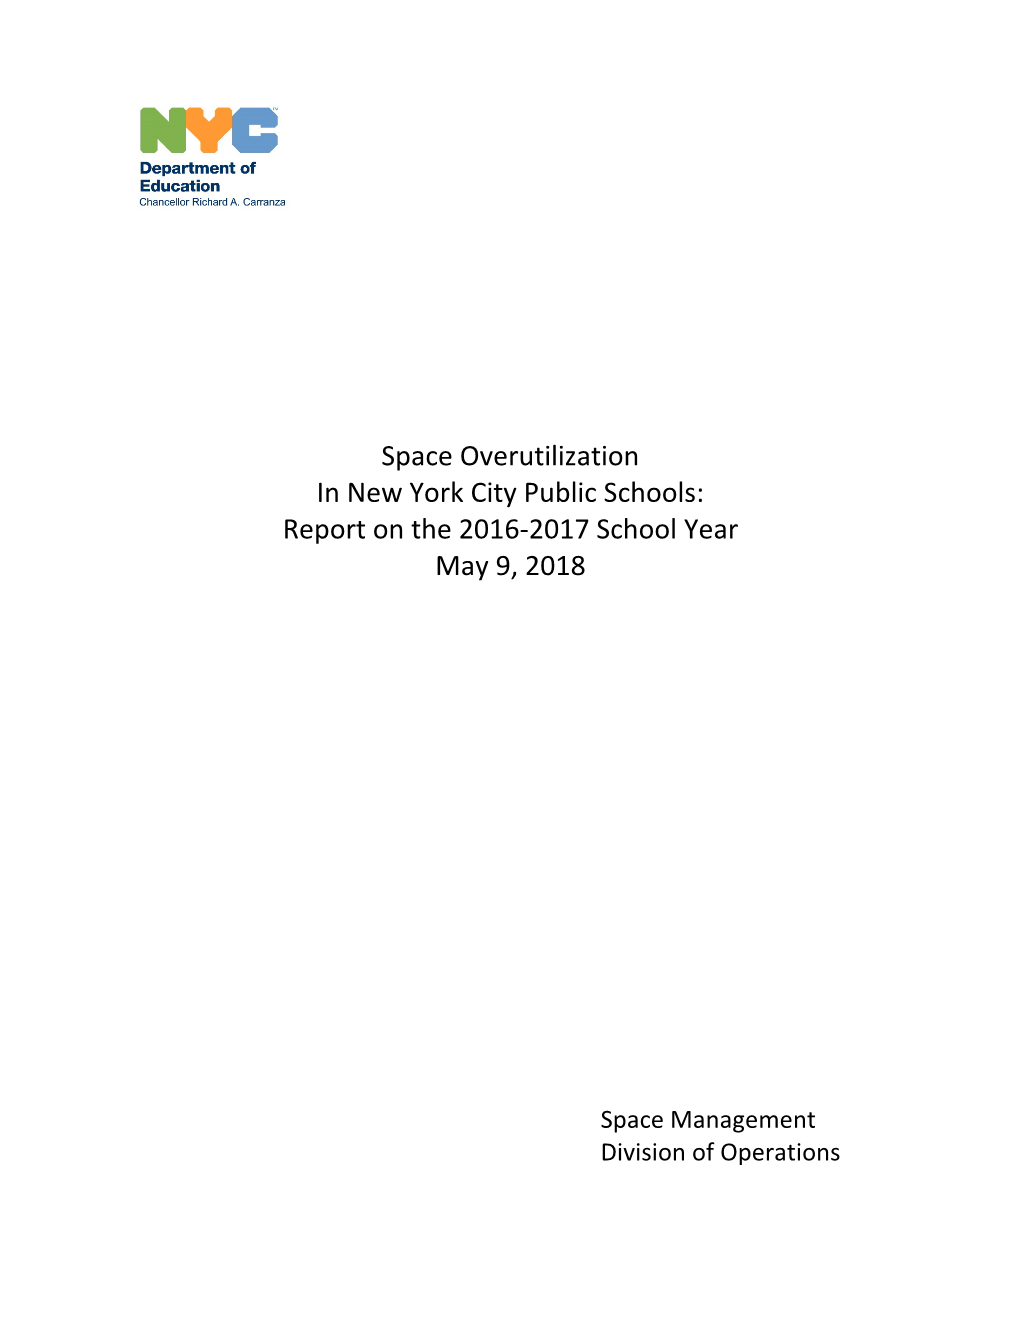 Space Overutilization in New York City Public Schools: Report of the 2016